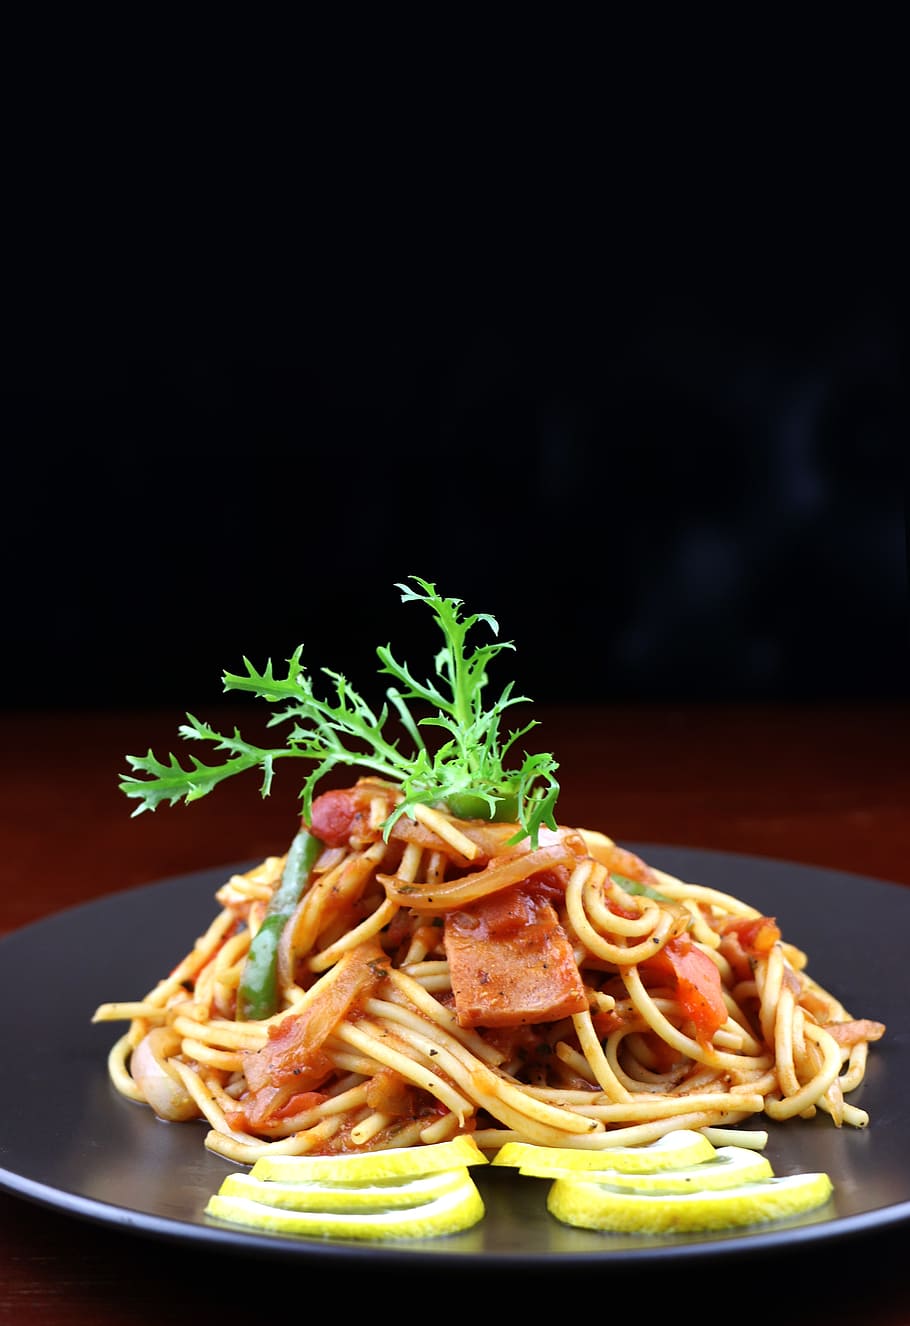 spaghetti, topped, green, vegetable, pasta, pies, western, food, food and drink, ready-to-eat